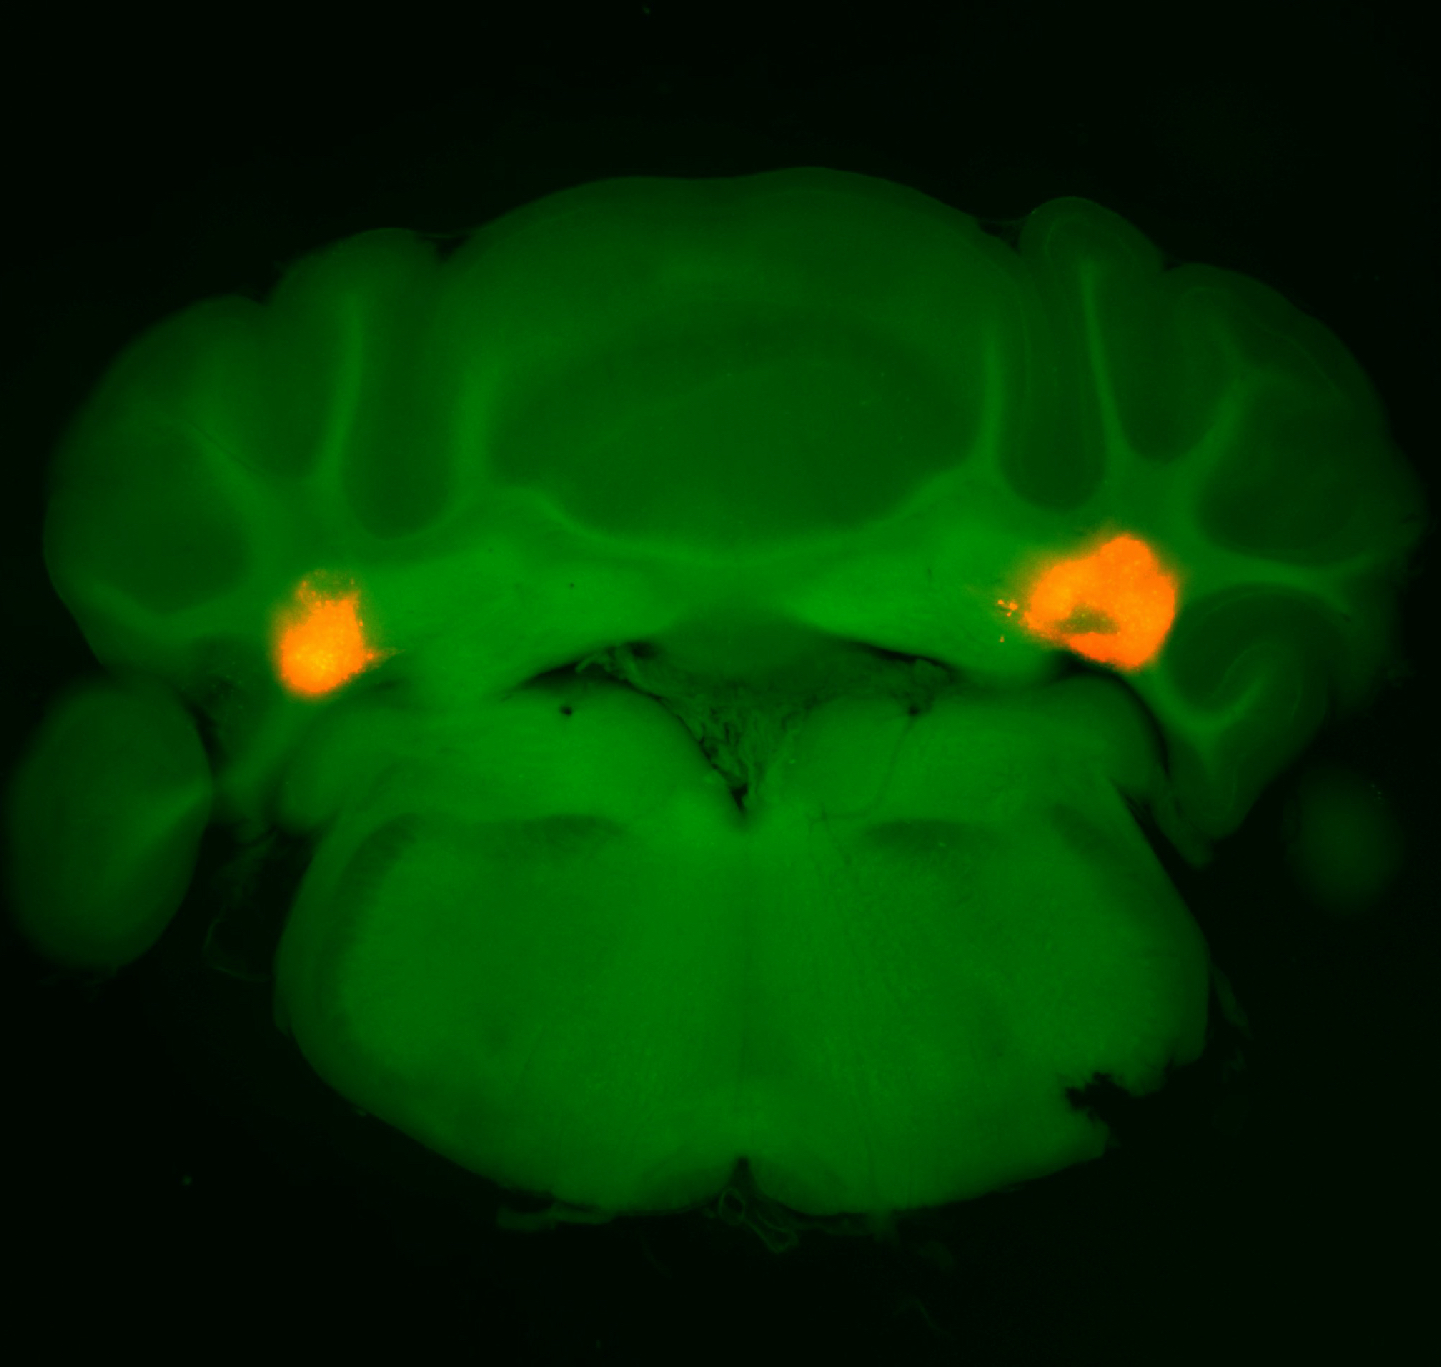 Image of brain cross section in fluorescent green with orange spots on either side